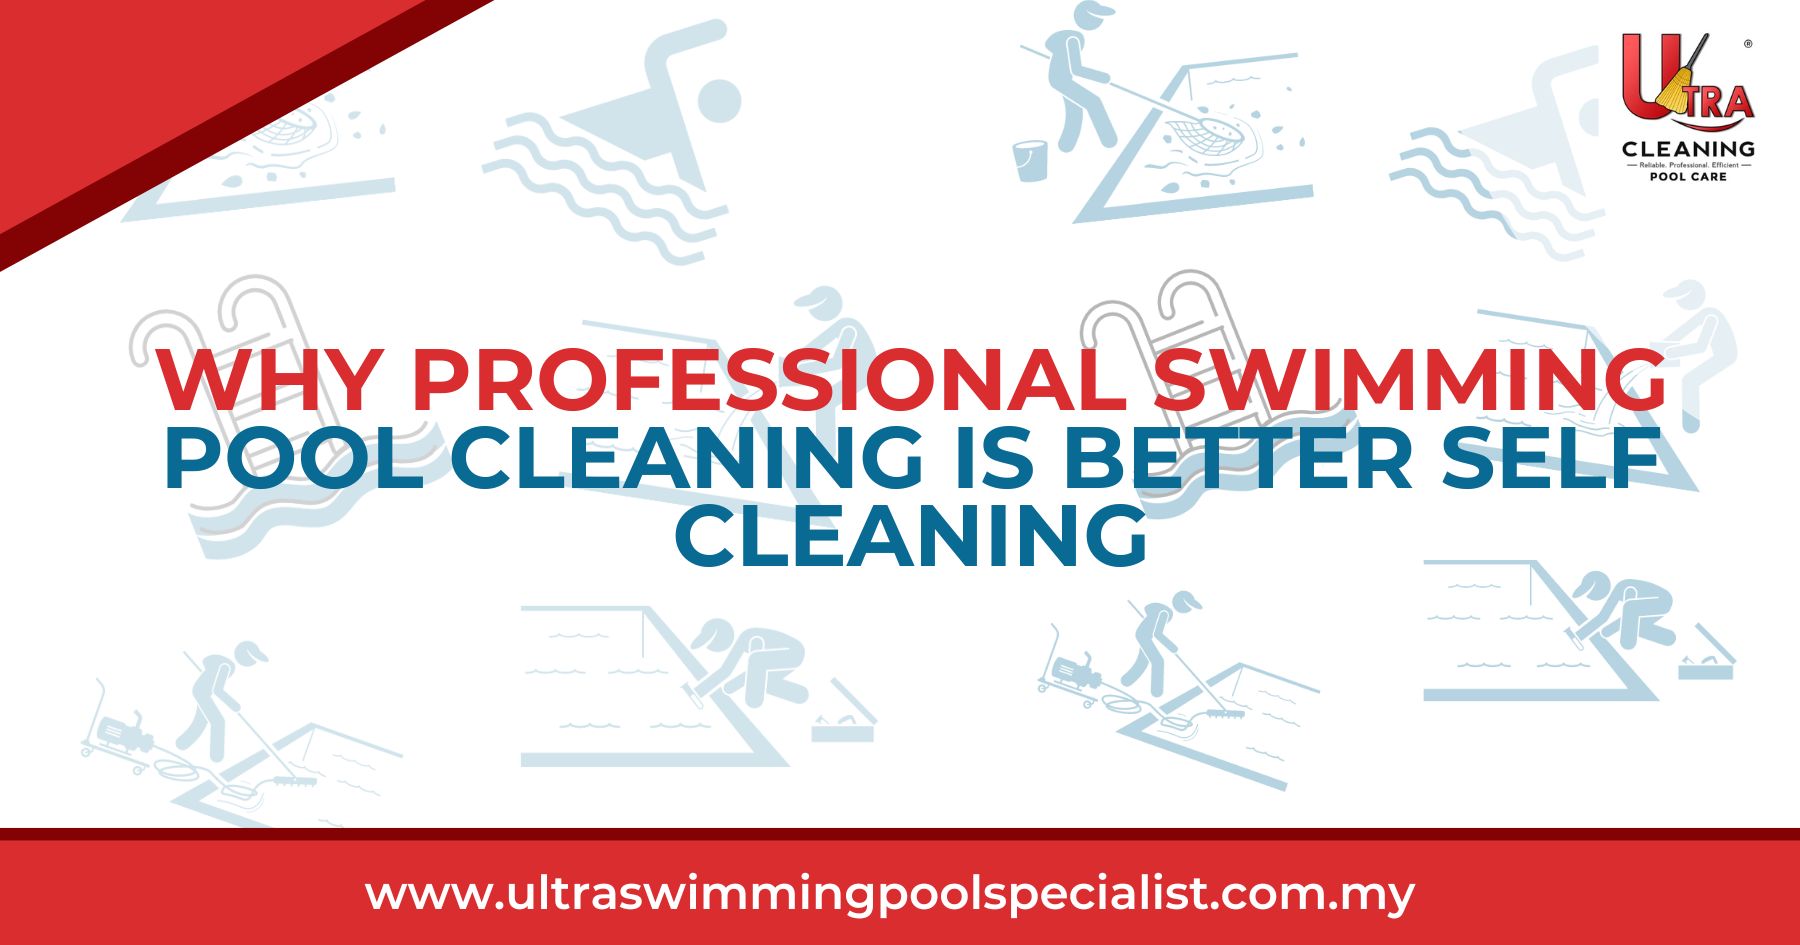 Why Professional Swimming Pool Cleaning is Better Self Cleaning